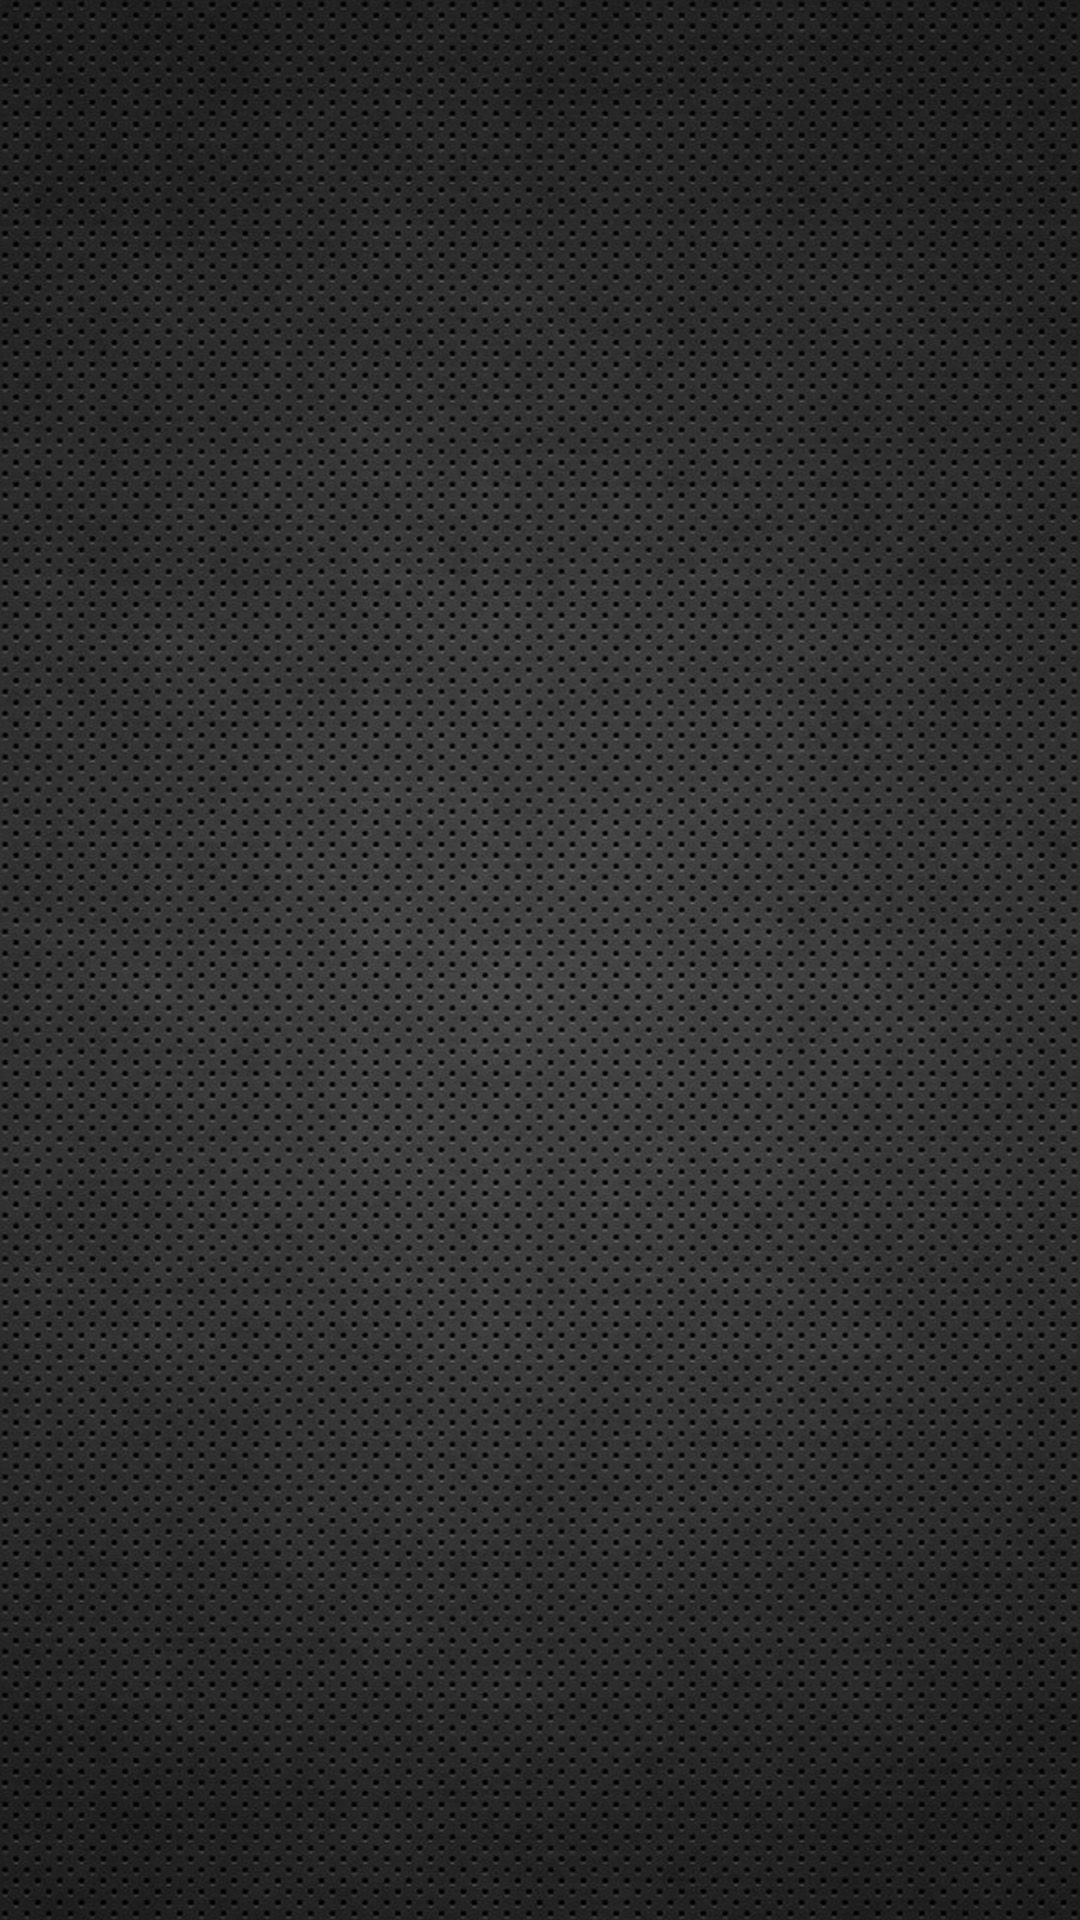 Samsung Galaxy S5 Wallpaper Texture Shy Android